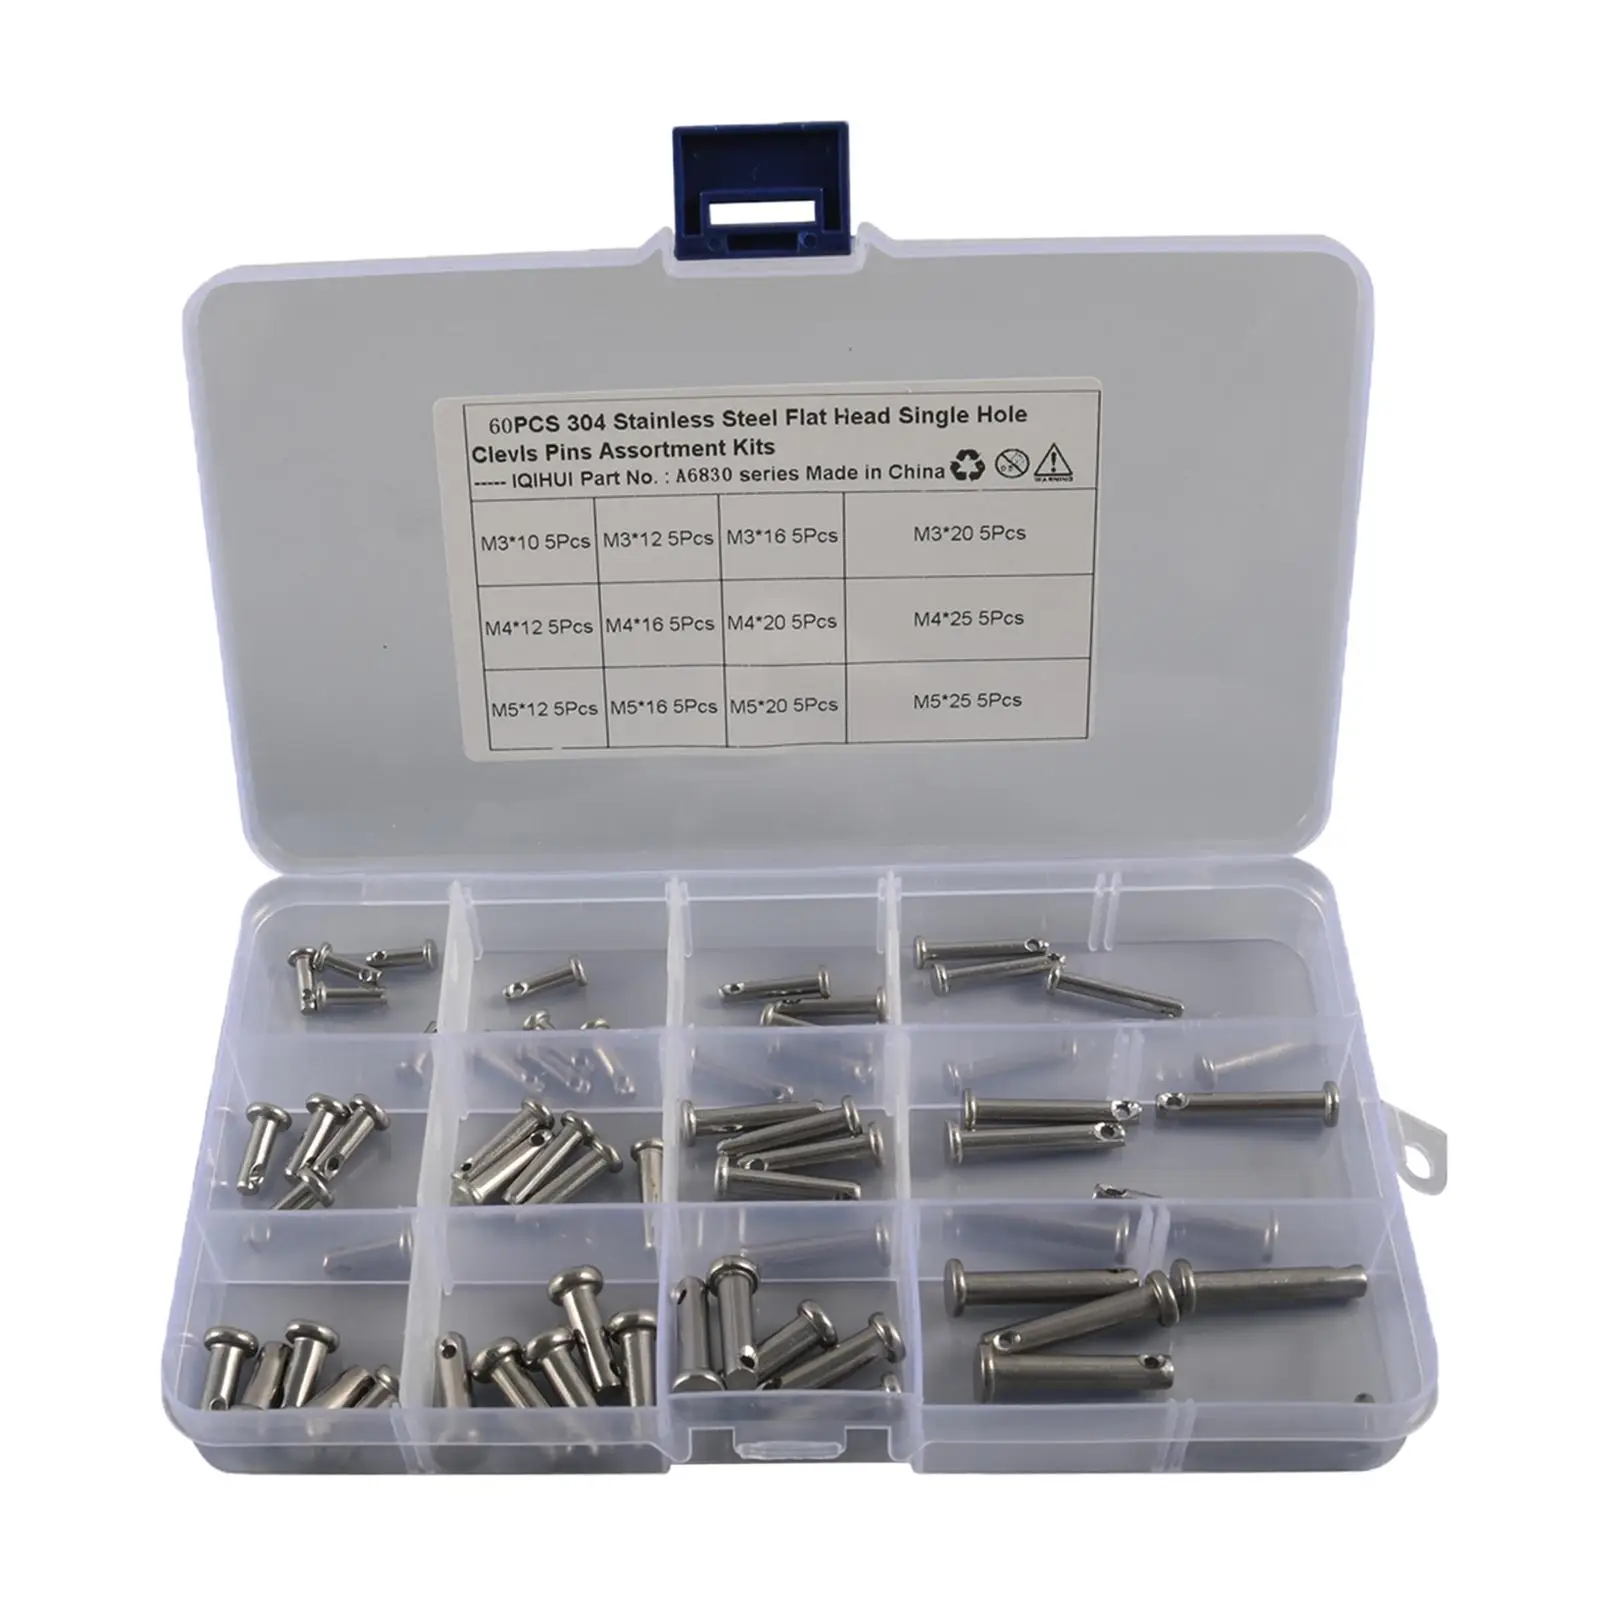 60x Clevis Pins Assortment Kit T Shape Round Pin Flat Head Pin Single Hole M3 M4 M5 12 Type Fits for Furniture Installation